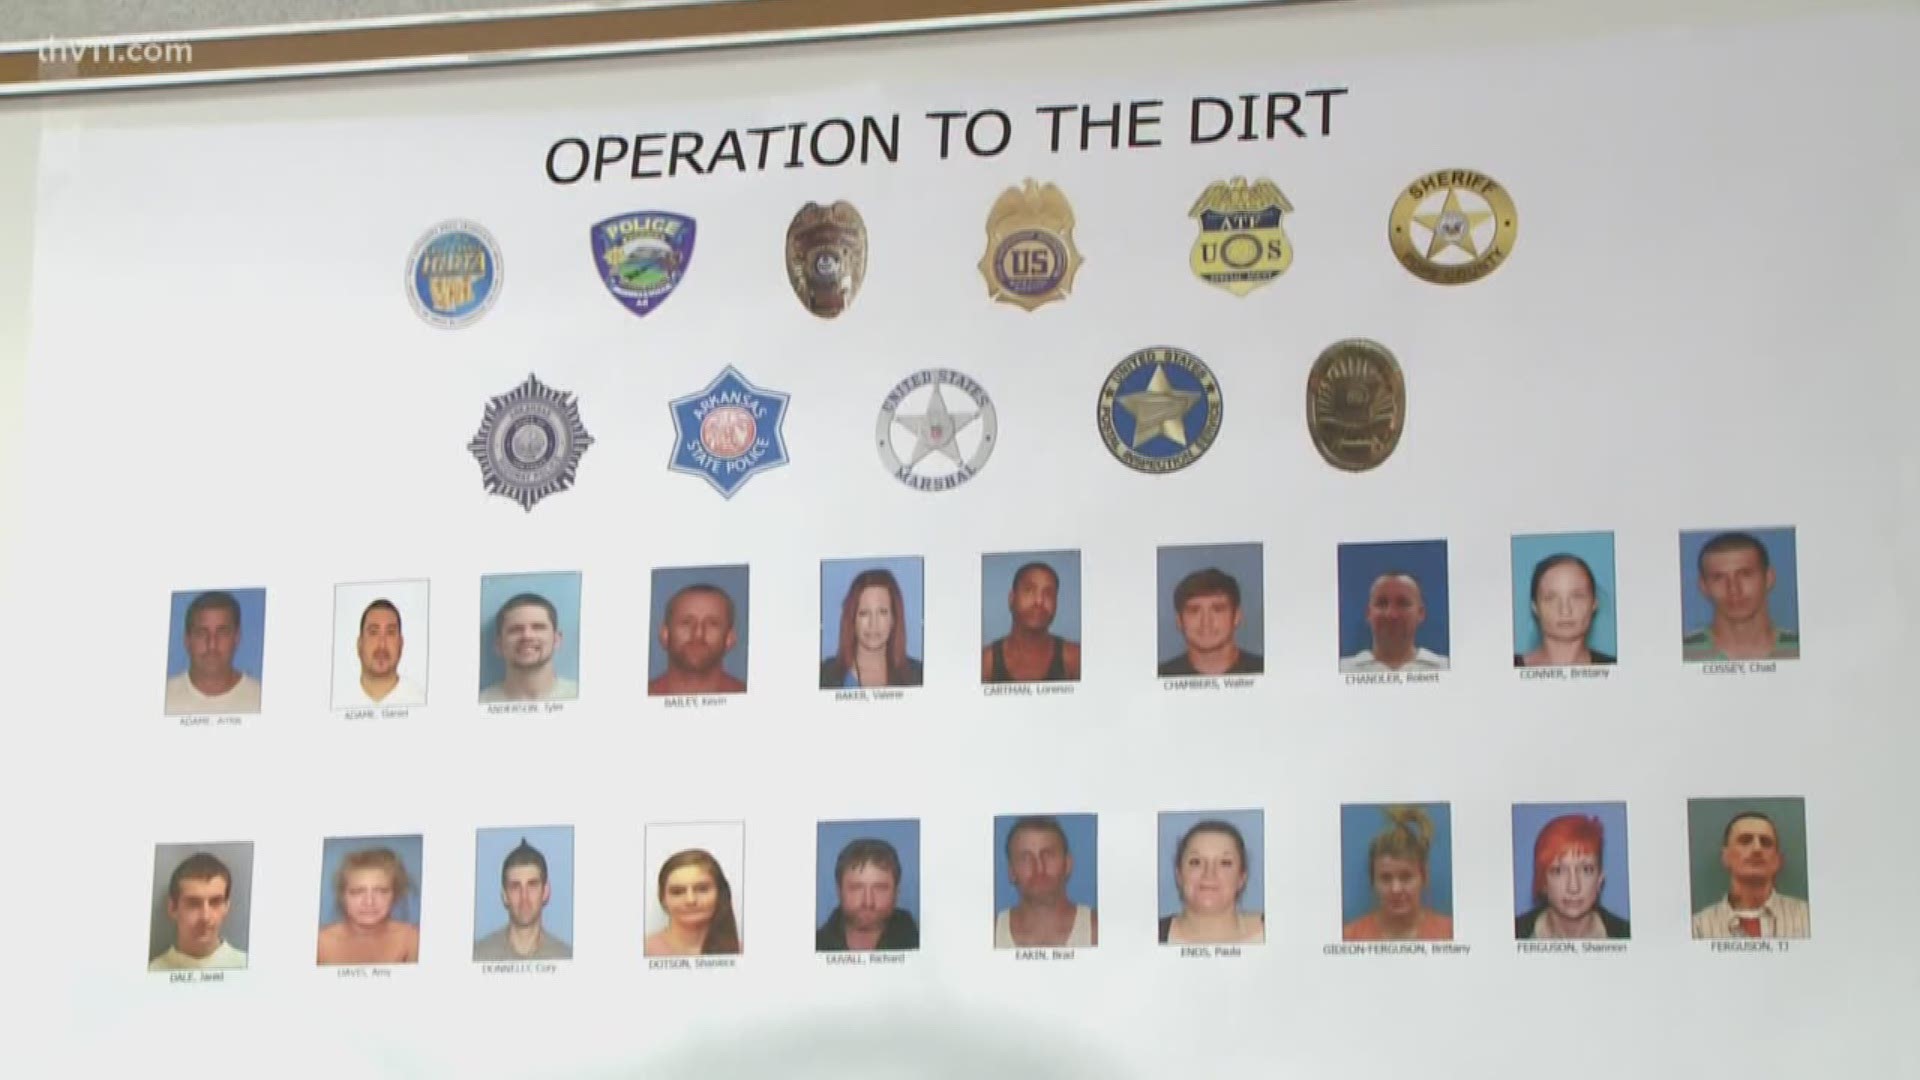 Cody Highland's first full day on the job was marked by a huge drug bust.